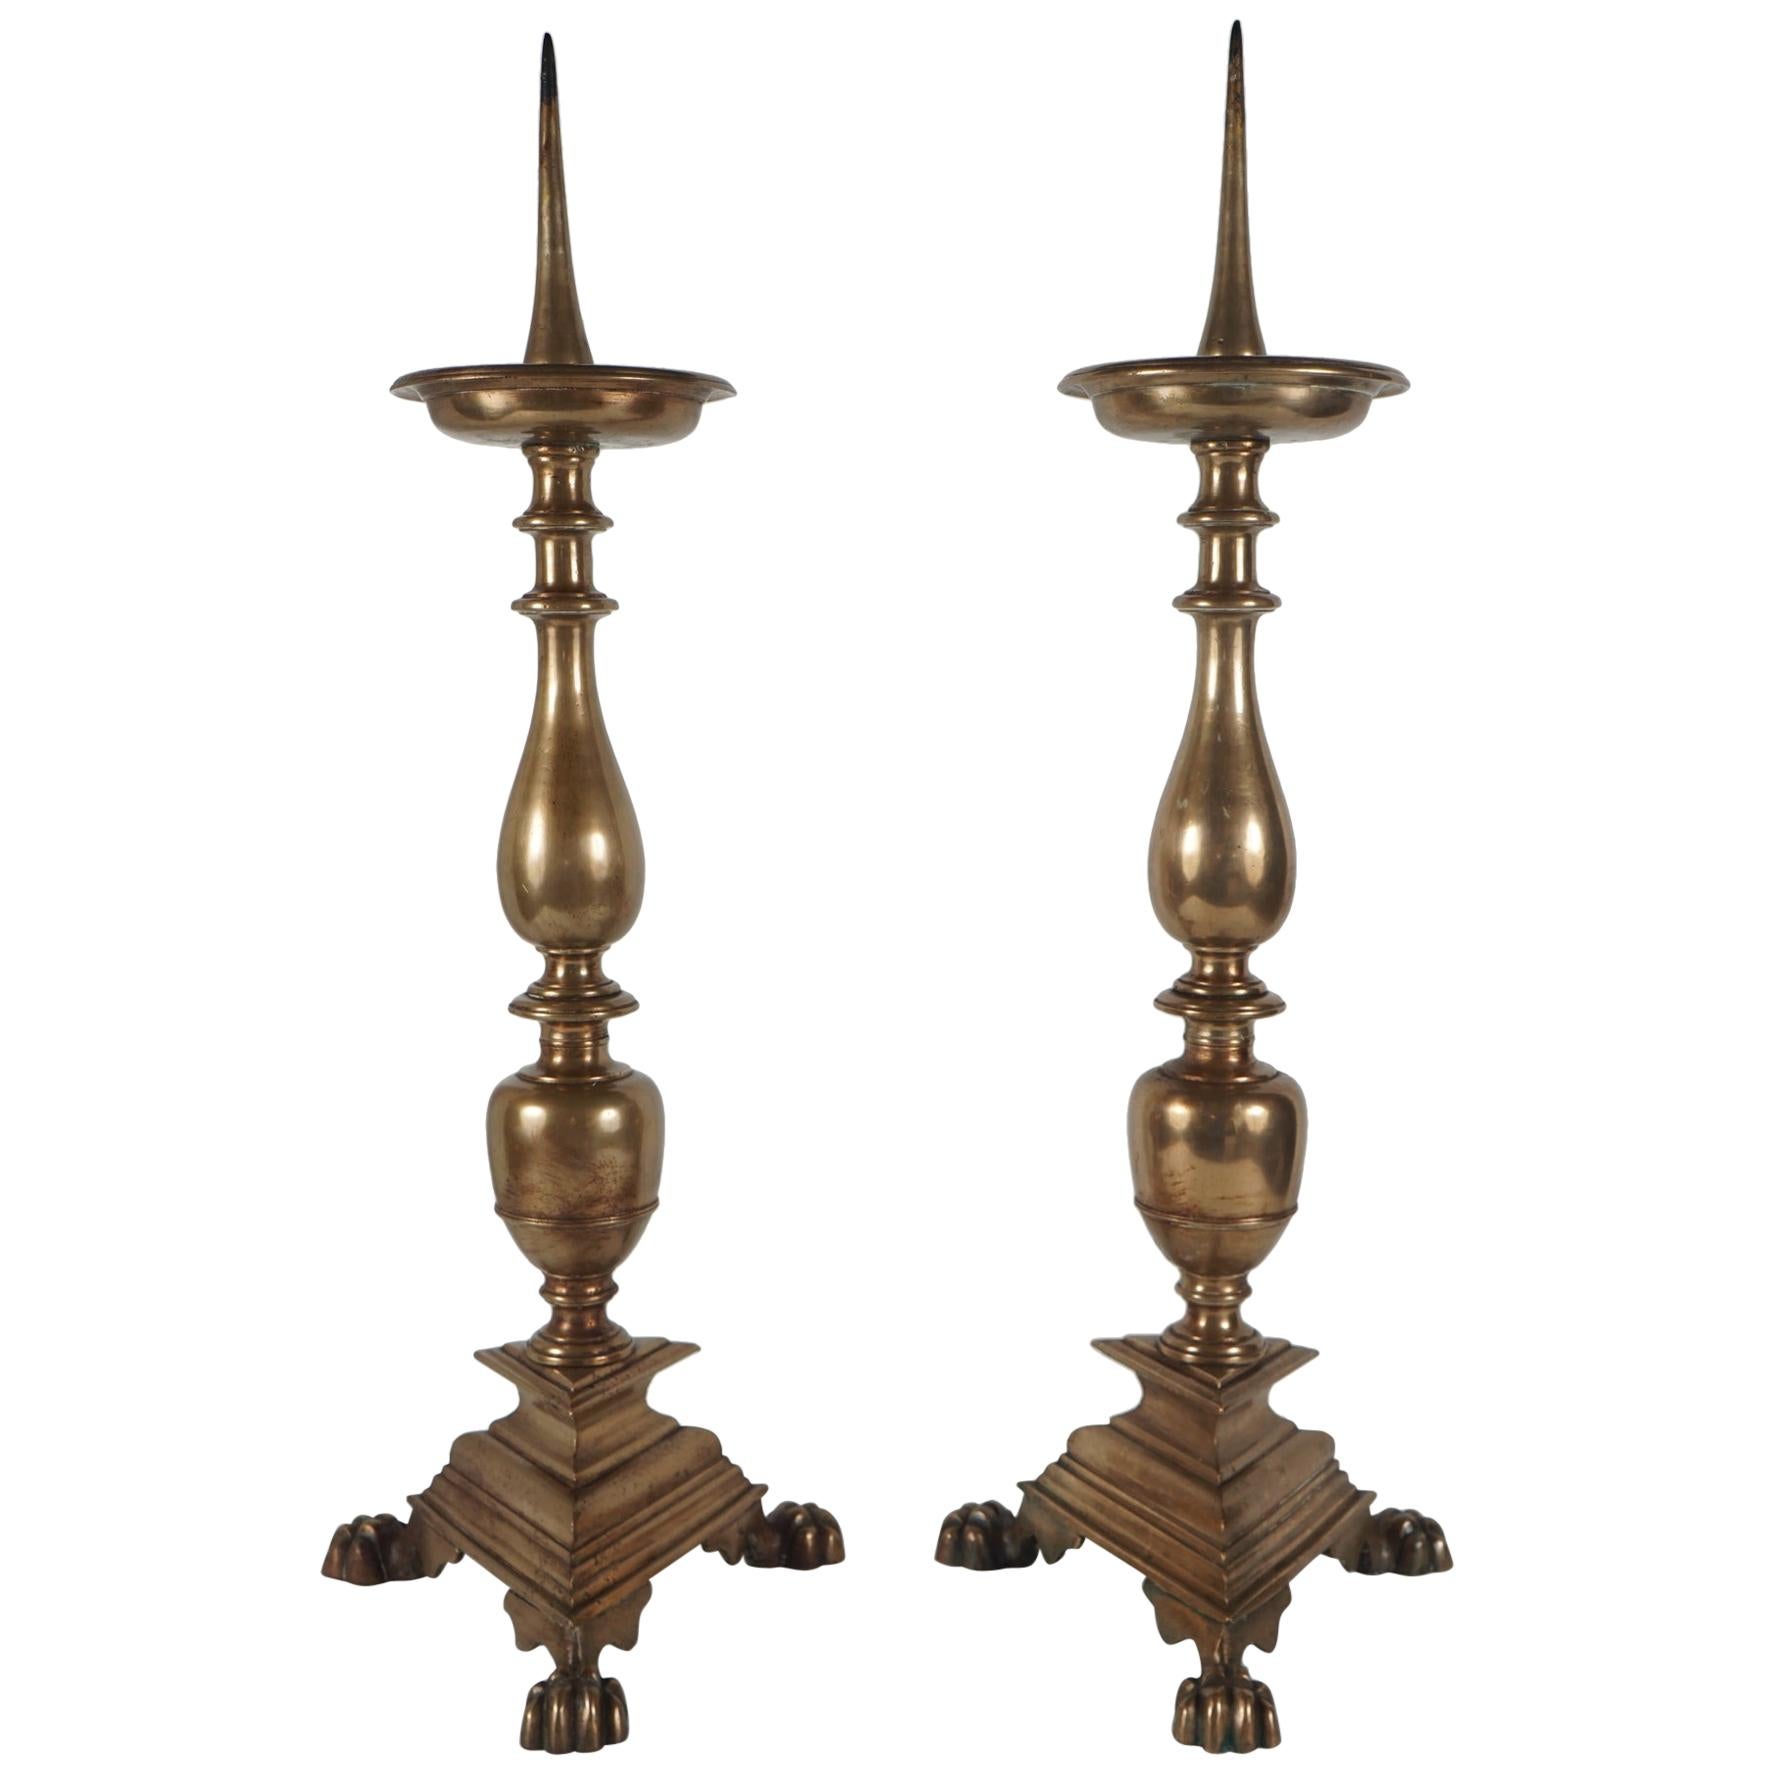 Pair of Large Cast Bronze Late 18th Century Continental Pricket Candlesticks